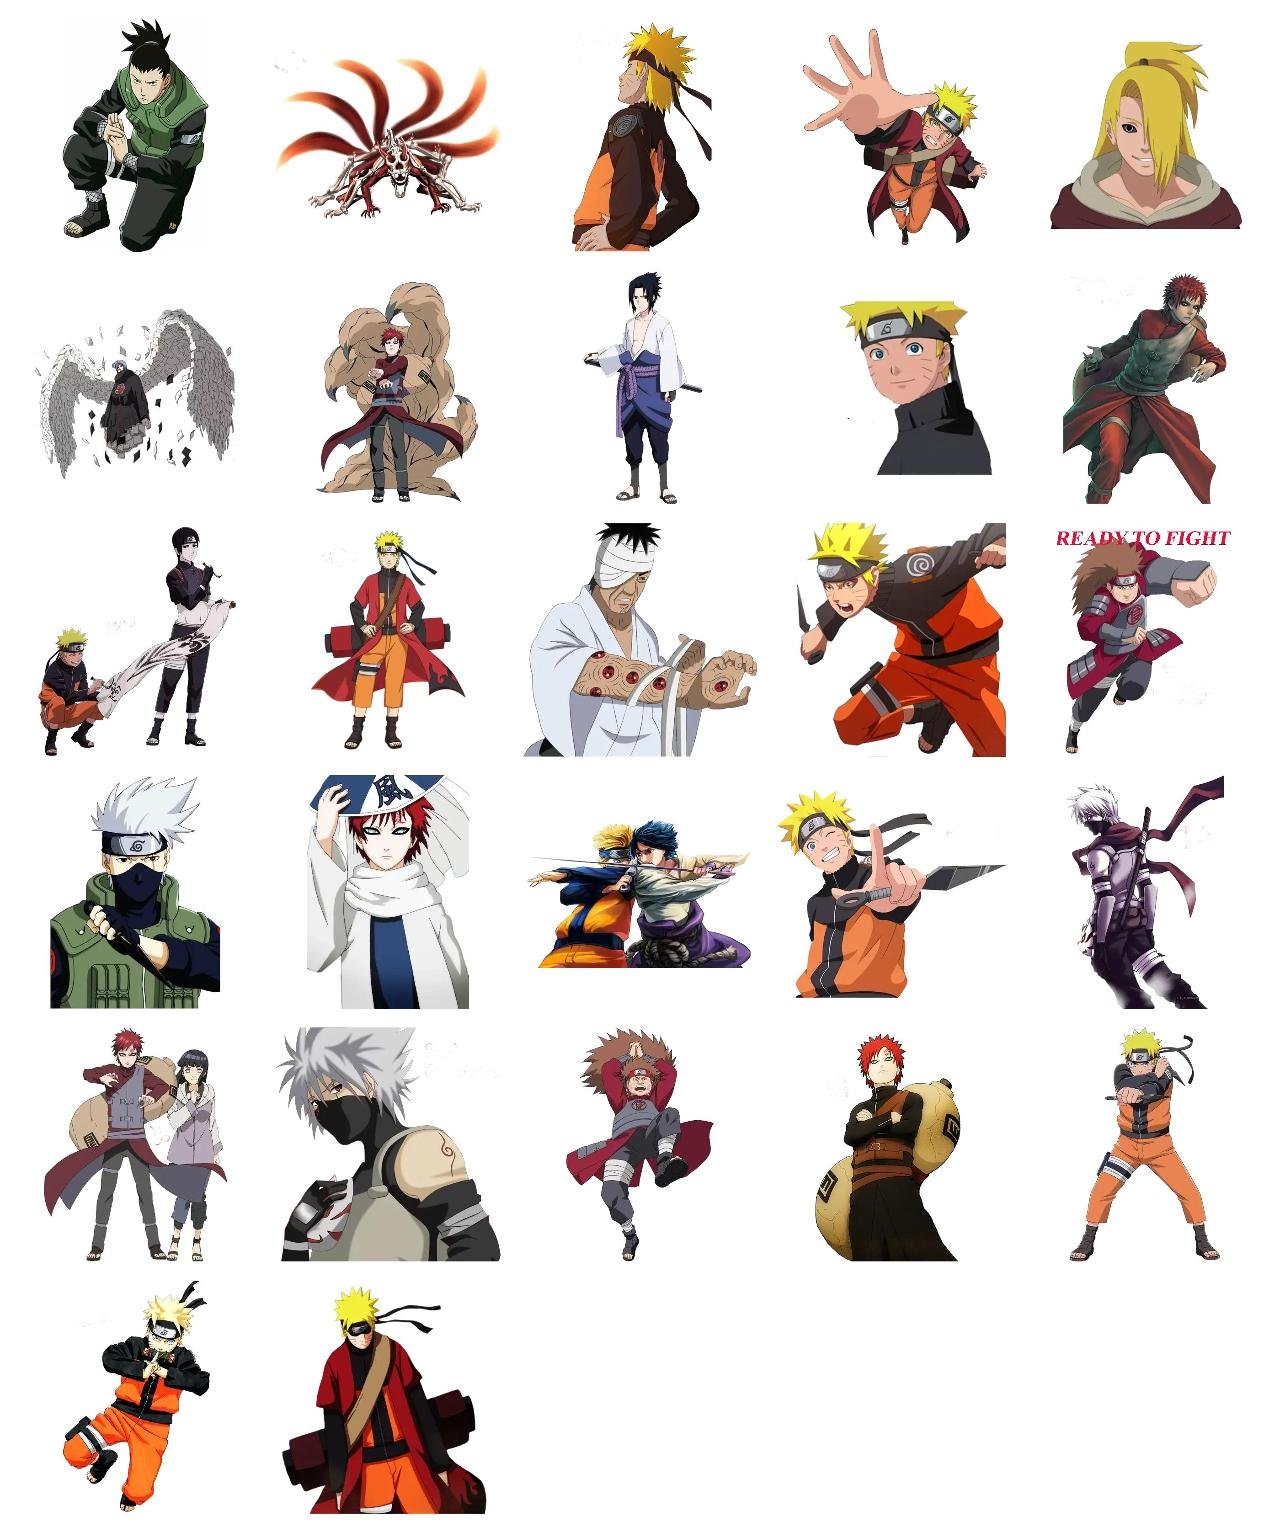 Naruto #10 Naruto sticker pack for Whatsapp, Telegram, Signal, and others chatting and message apps